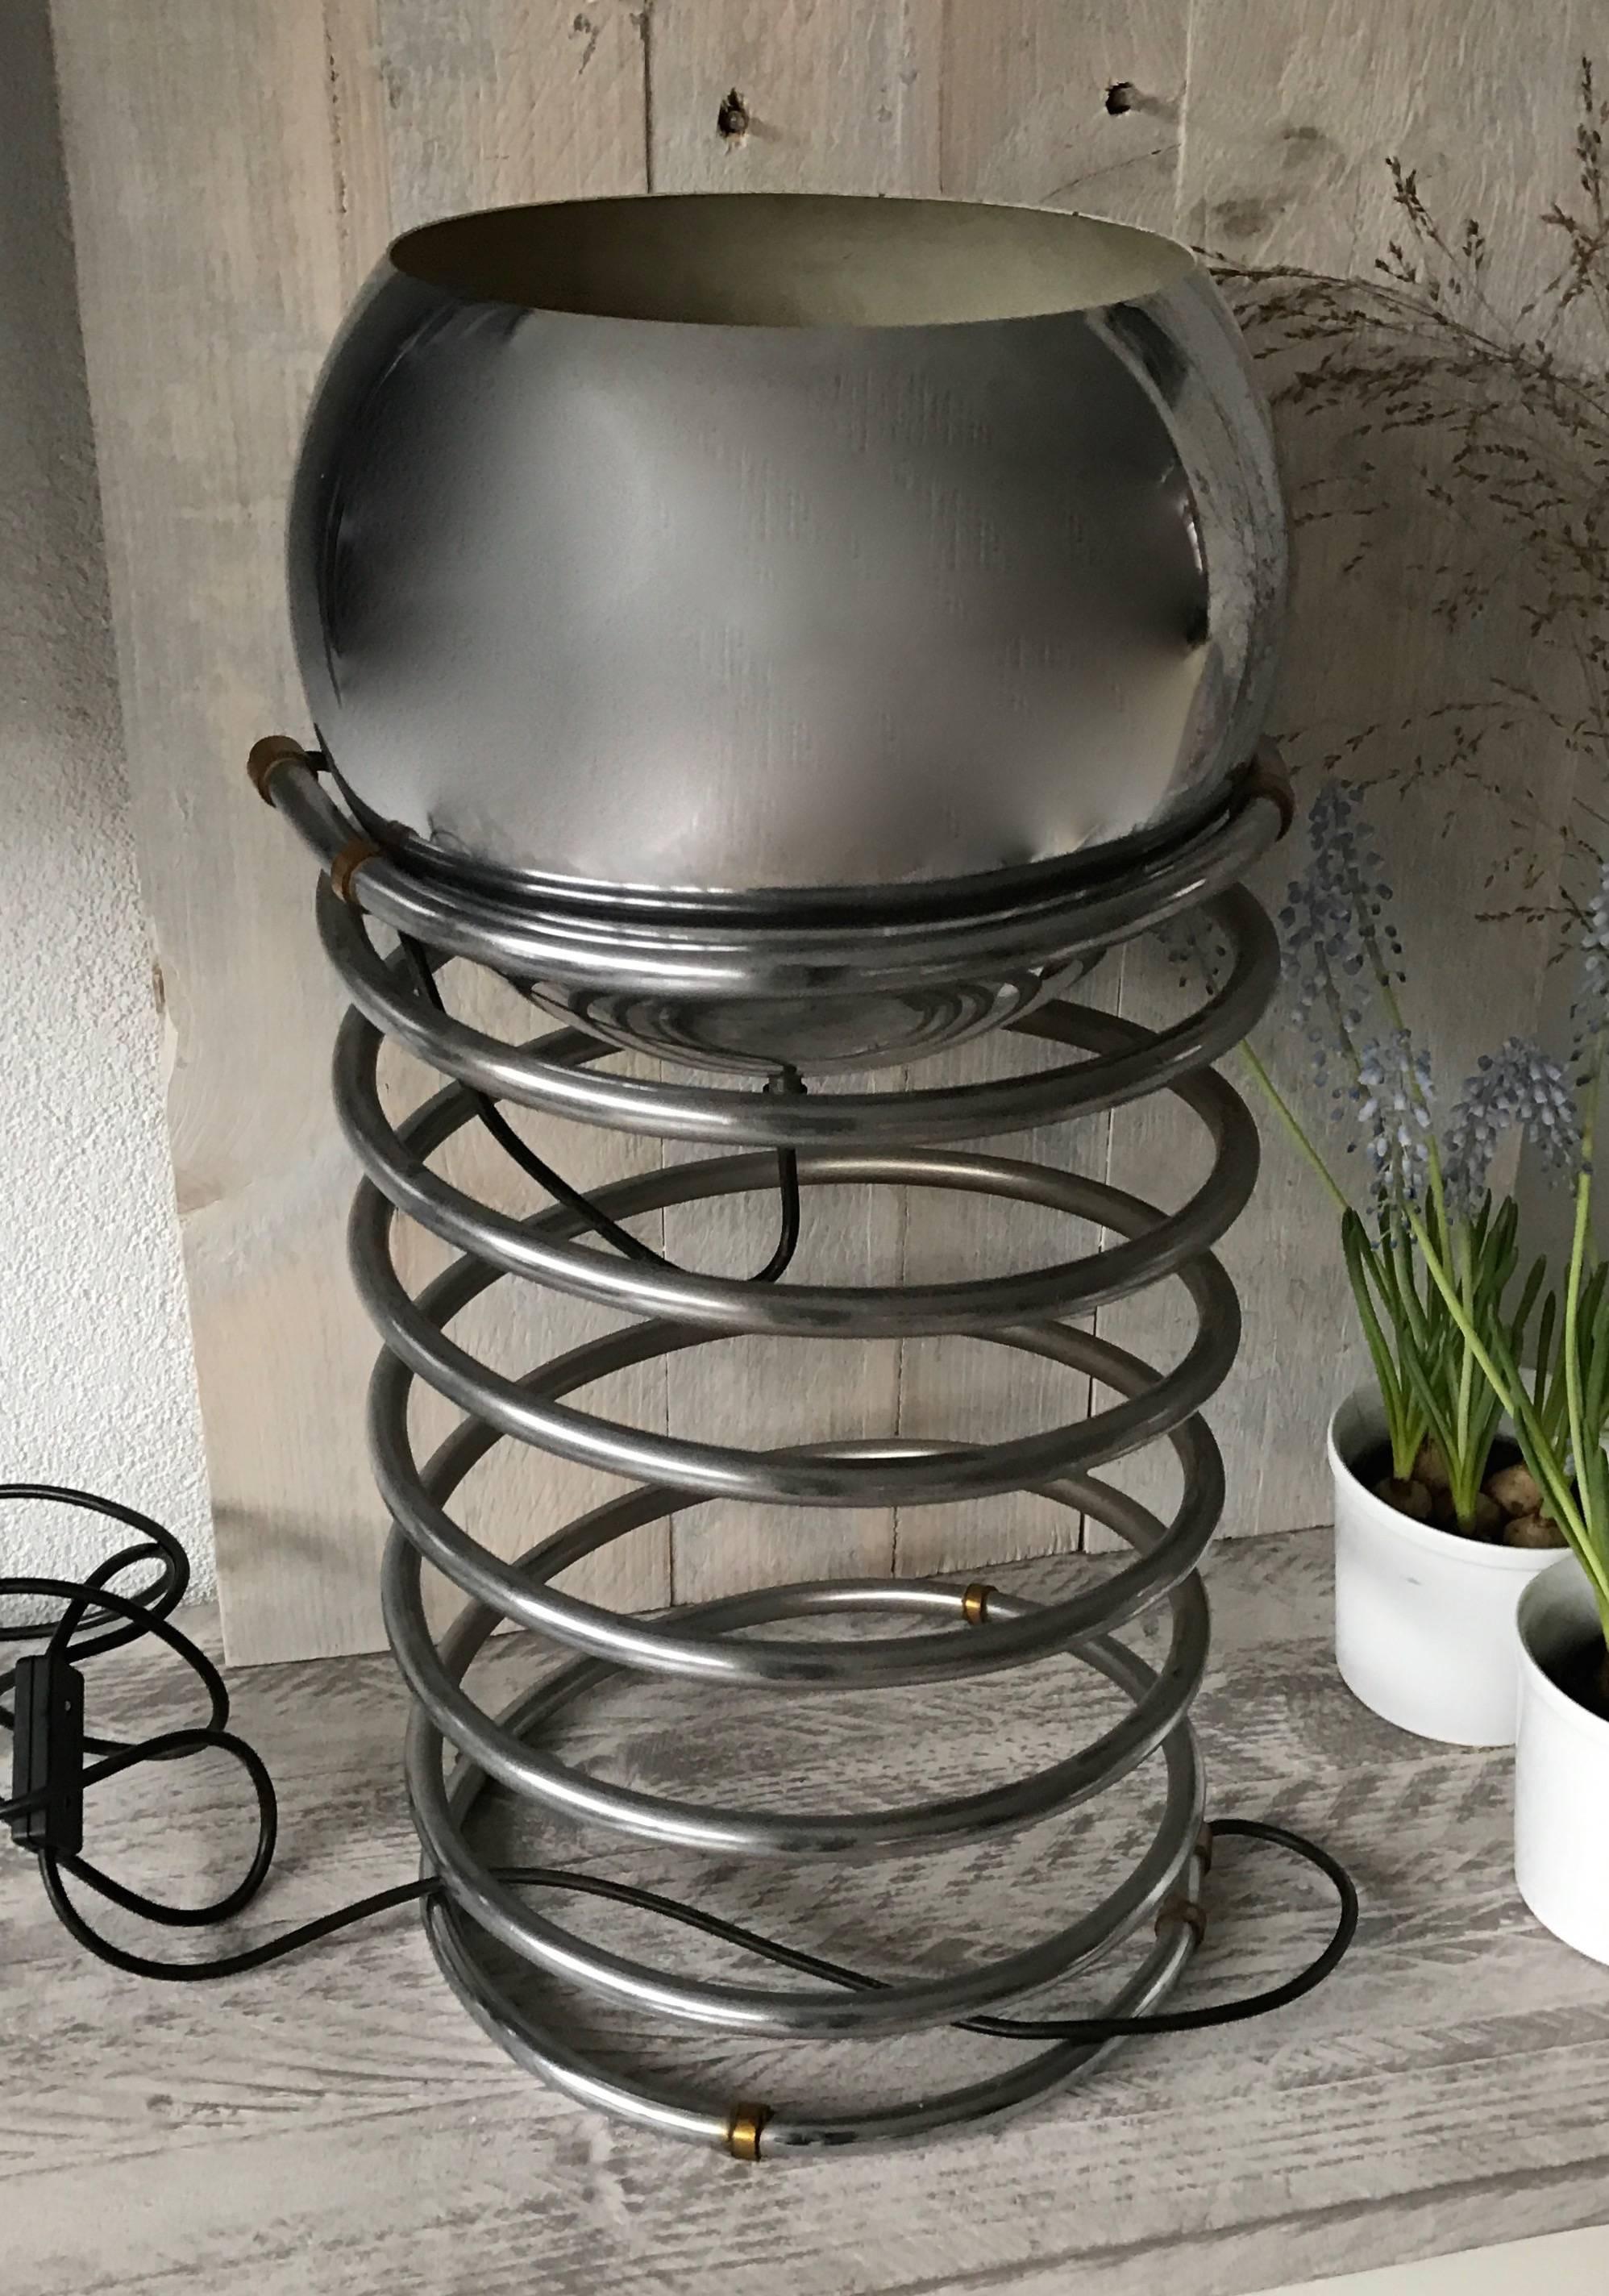 Vintage chrome metal table lamp with a barley twist.

This rare and practical spiral table lamp is in excellent condition. Because of the smart design it can be used in many ways with the light shining up, down or sideways. This vintage table or